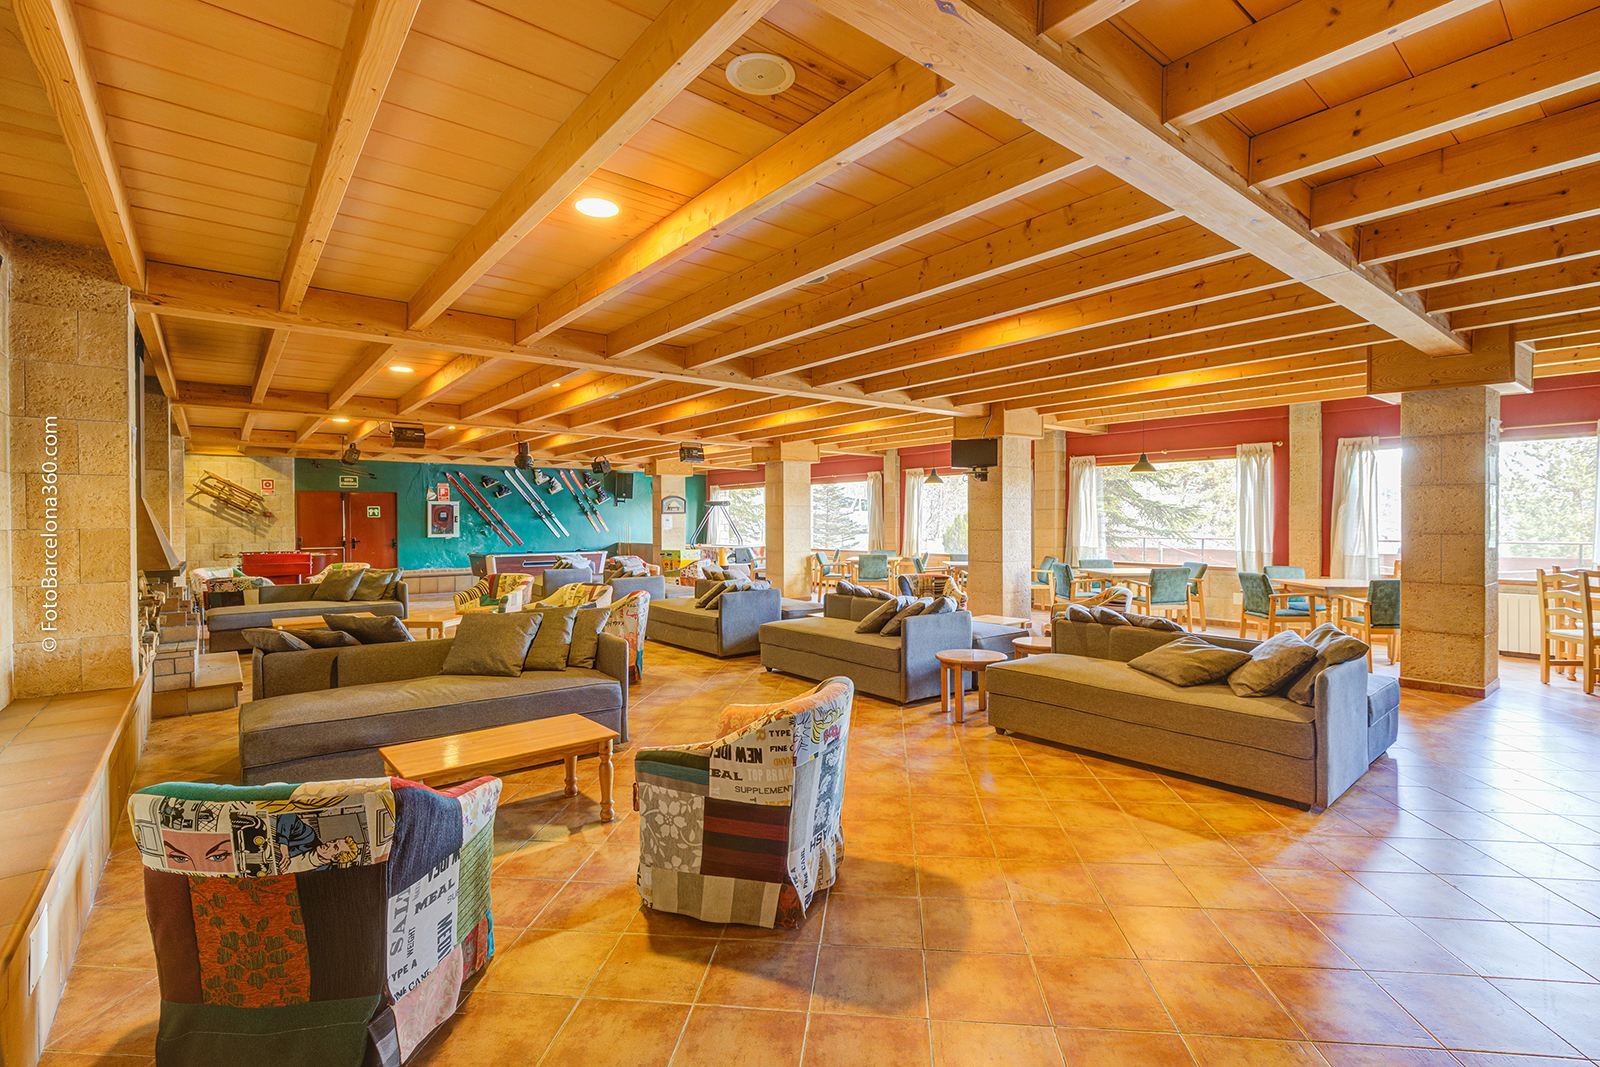 Hotel in La Molina. Fully equipped